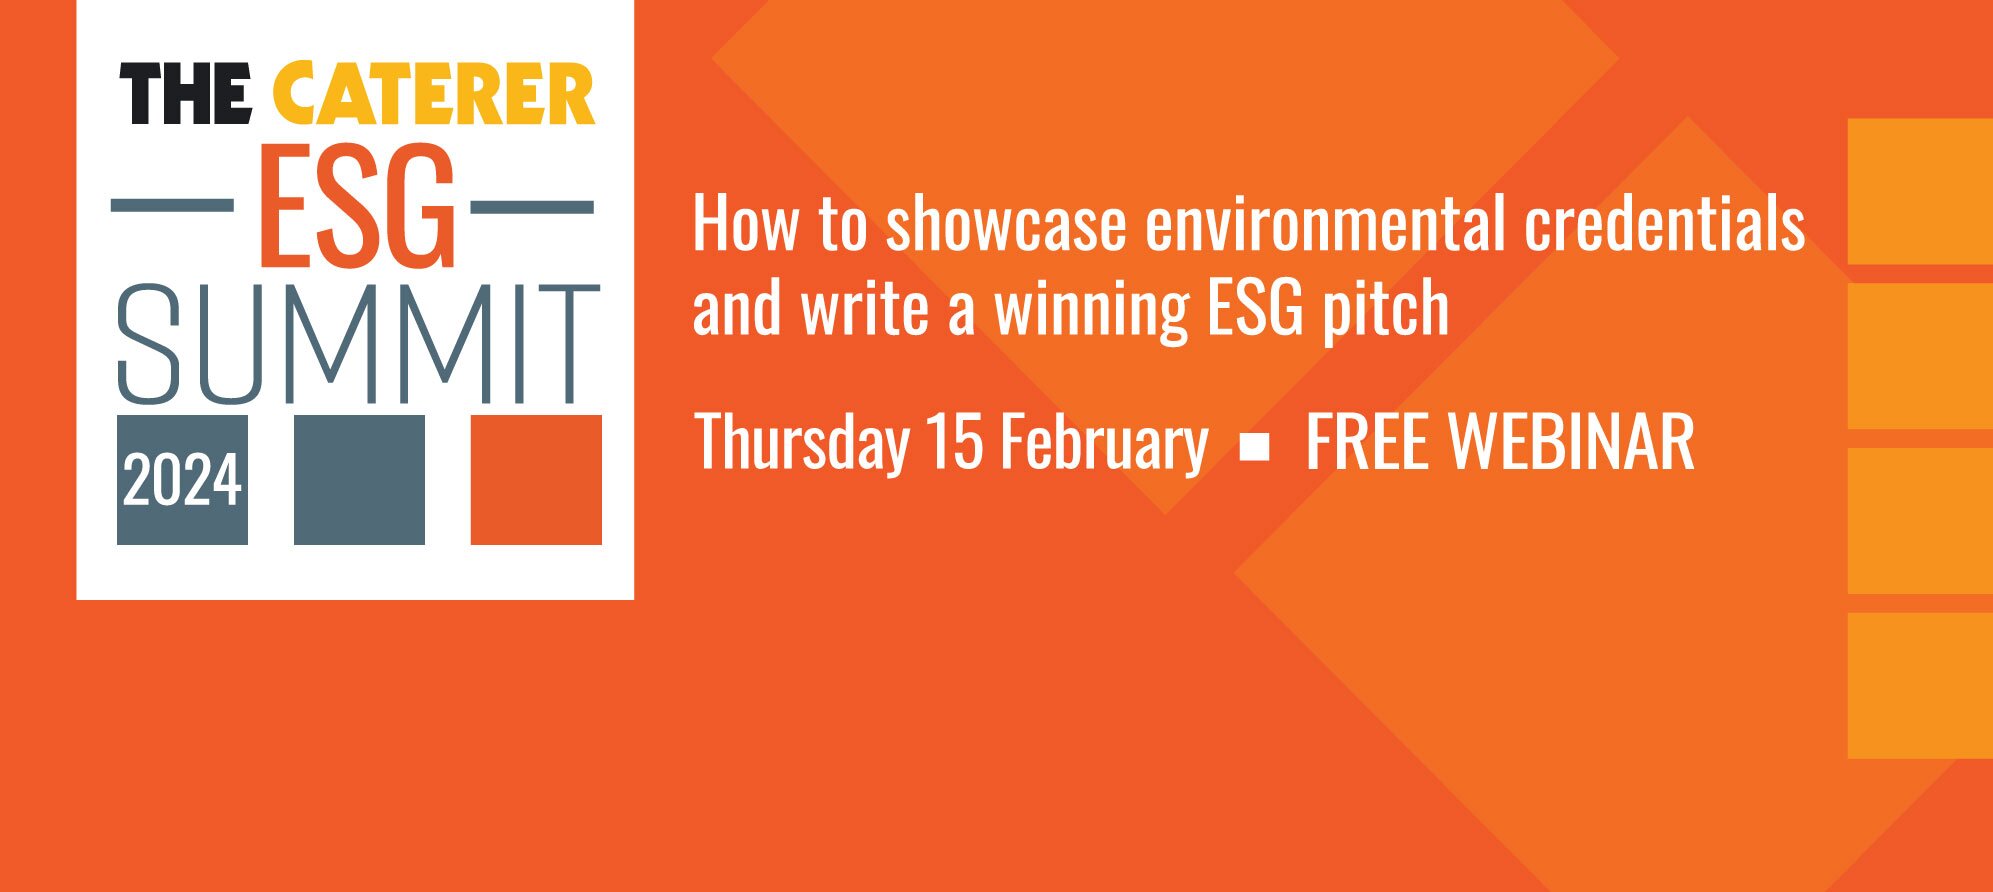 Join The Caterer's ESG Summit on 15 February